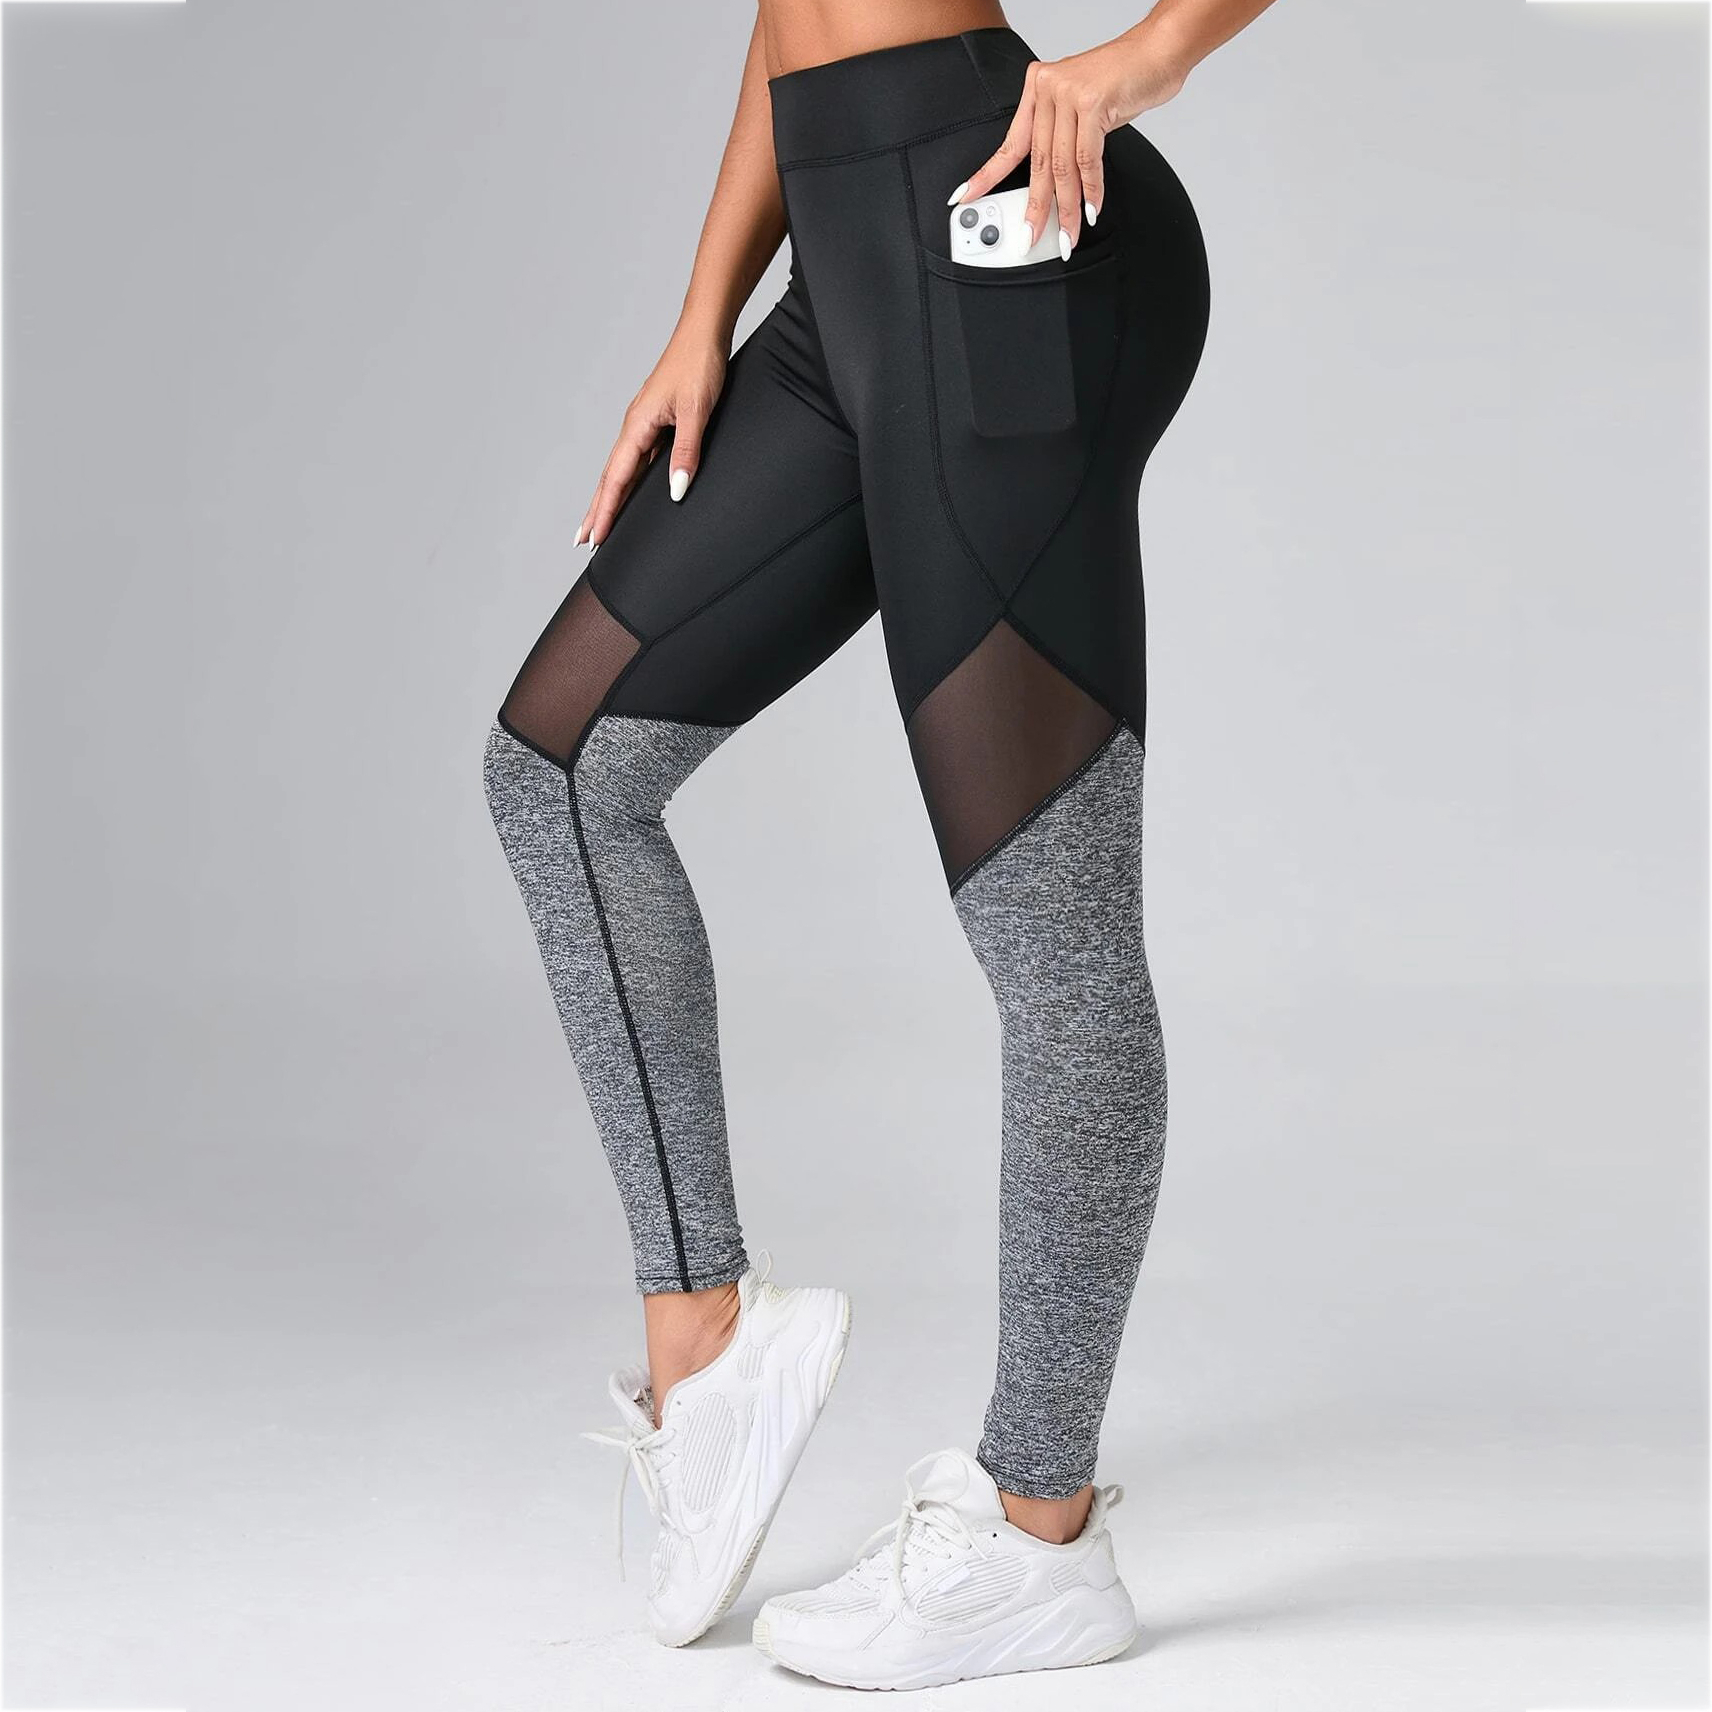 Contrast Color Panel Yoga Leggings Mesh Insert Gym Tights With Phone Pocket - Xl